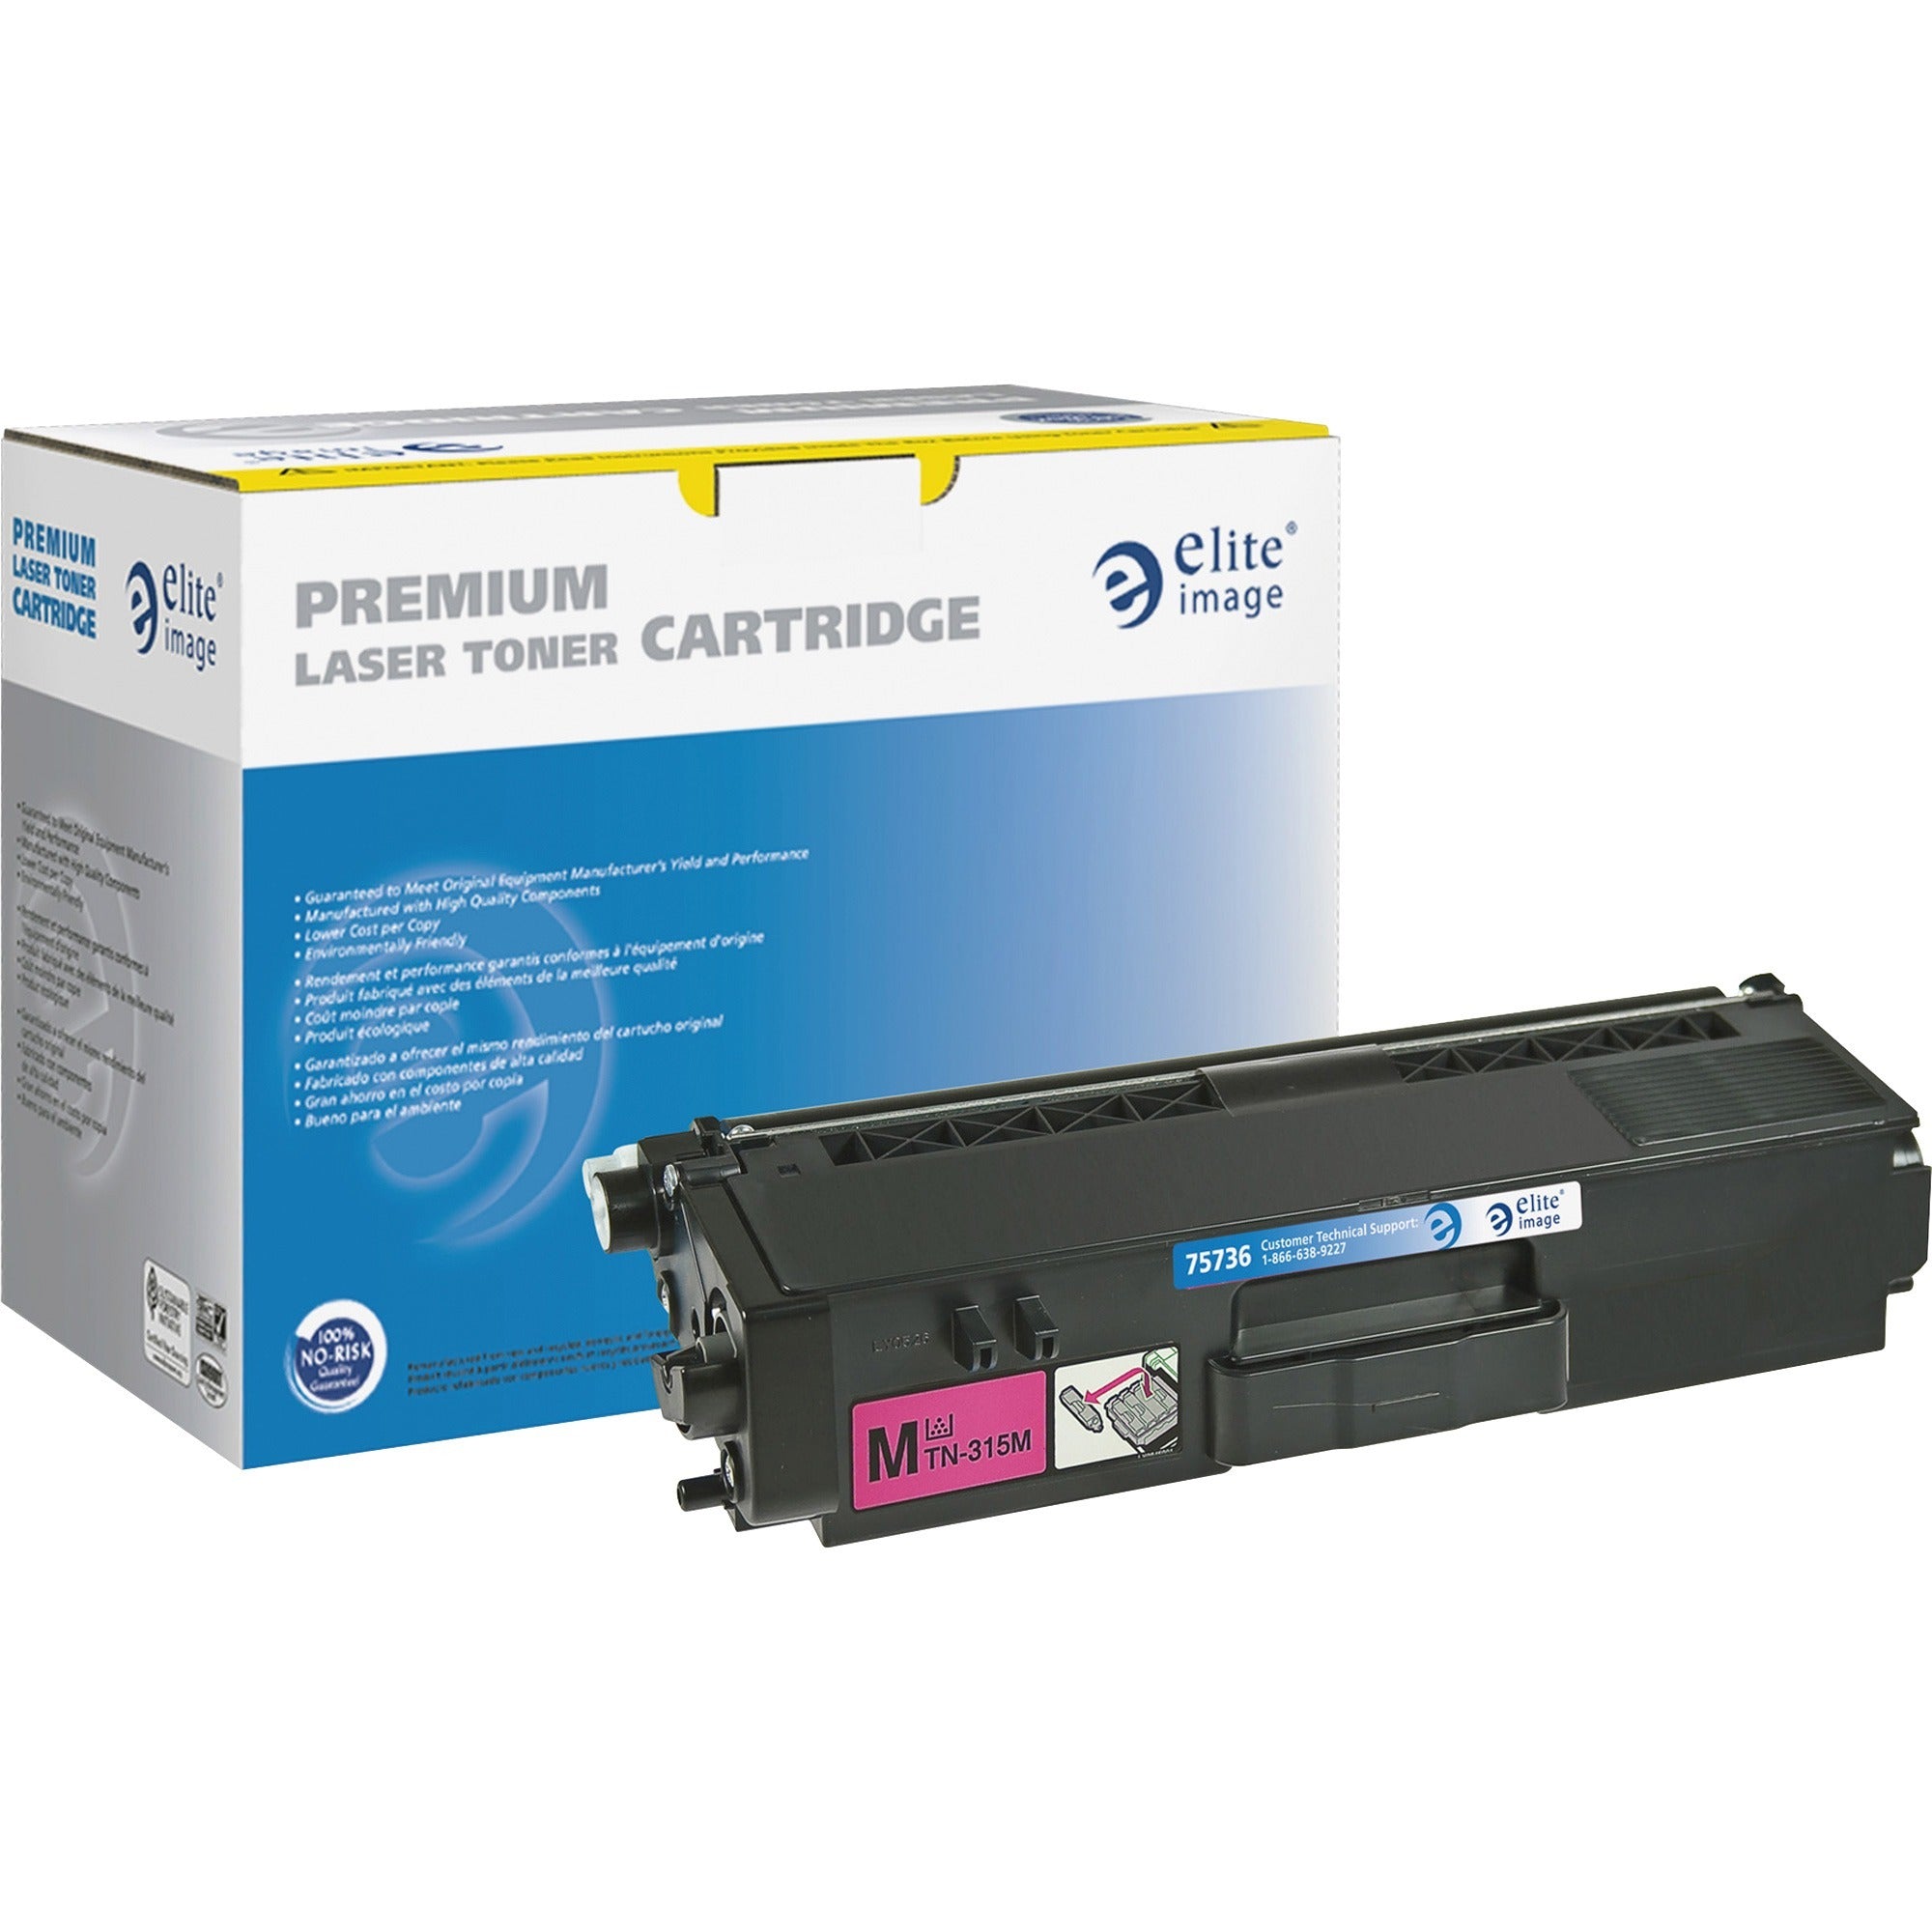 Elite Image Remanufactured High Yield Laser Toner Cartridge - Alternative for Brother TN315 - Magenta - 1 Each - 3500 Pages - 1